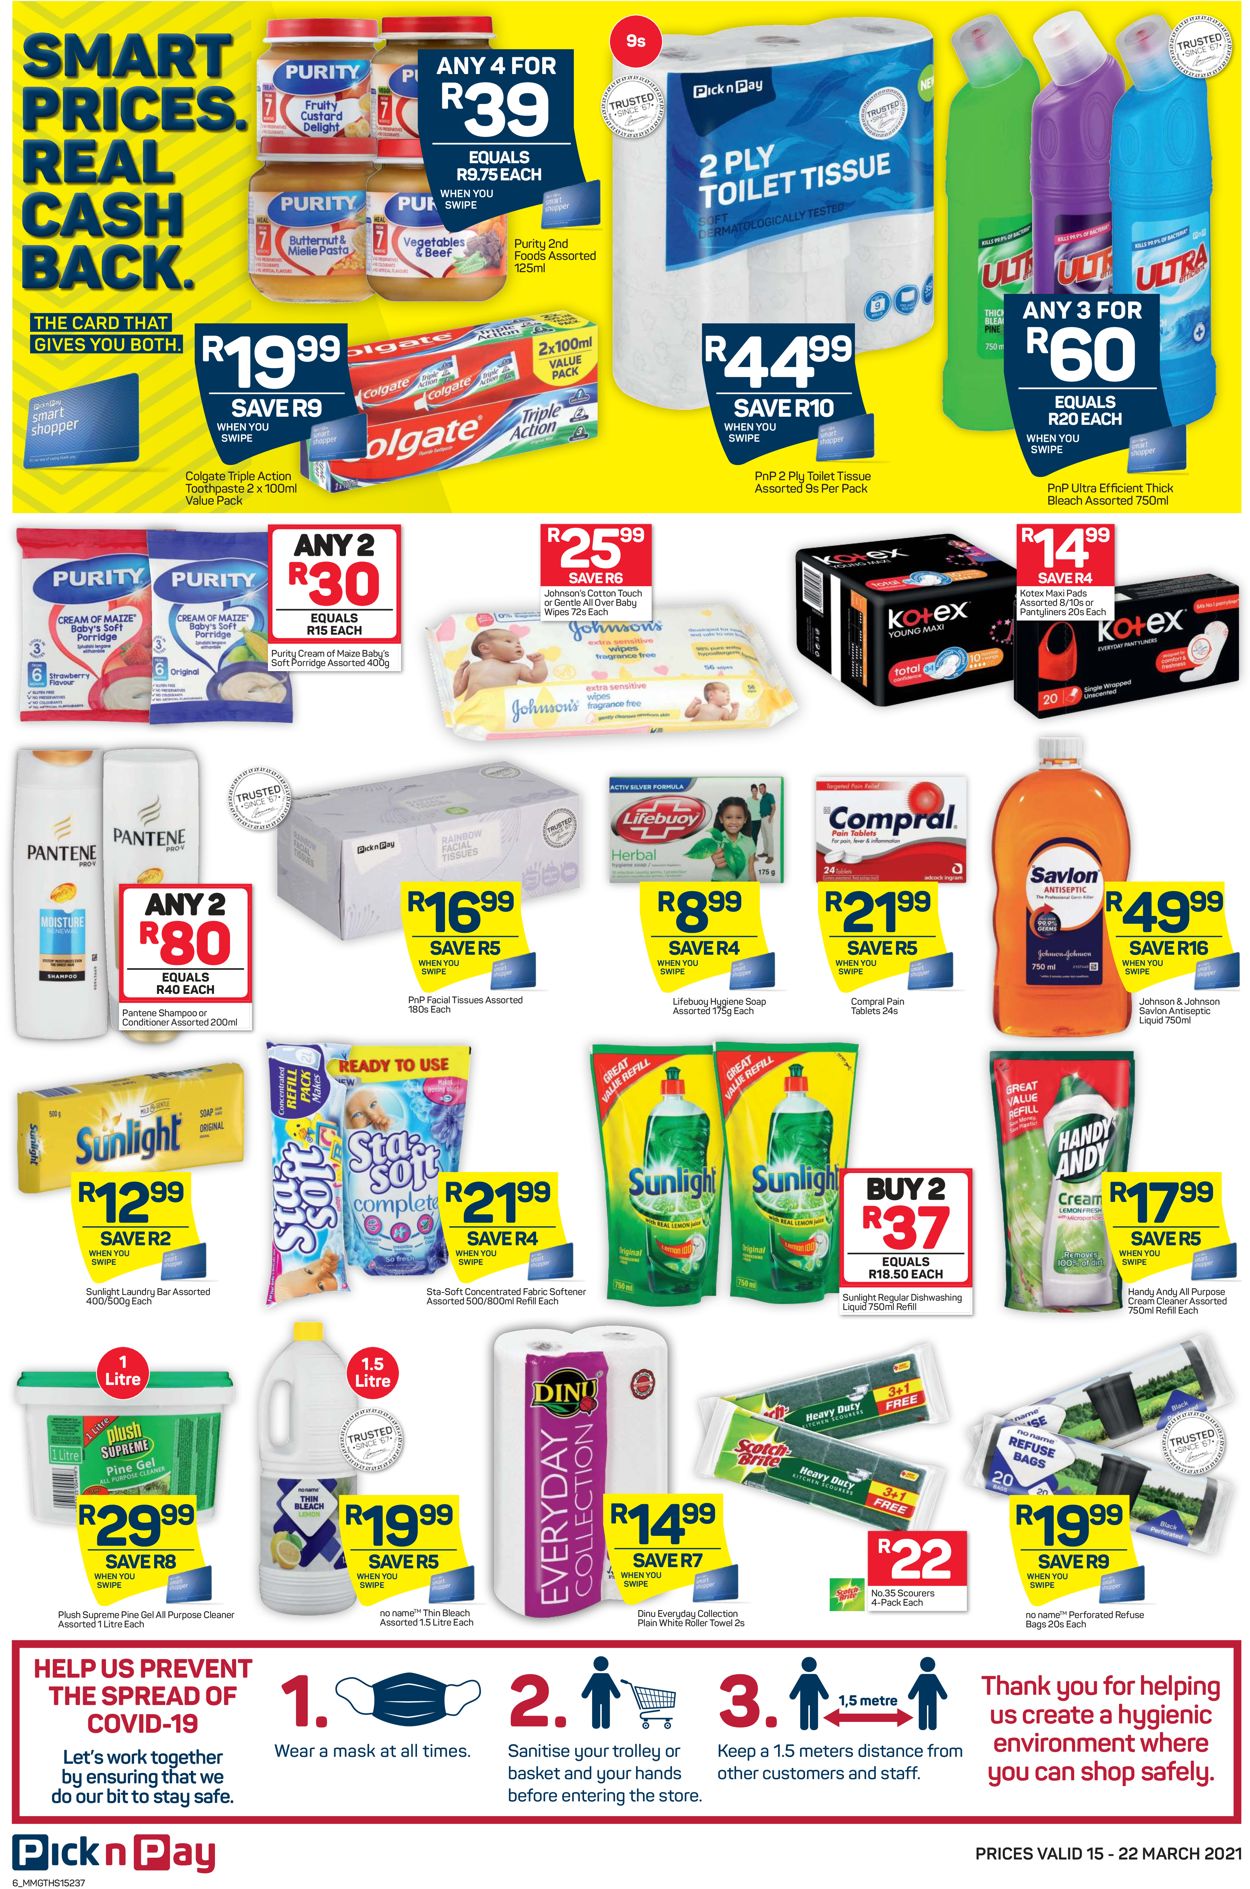 Pick n Pay Catalogue - 2021/03/15-2021/03/22 (Page 6)